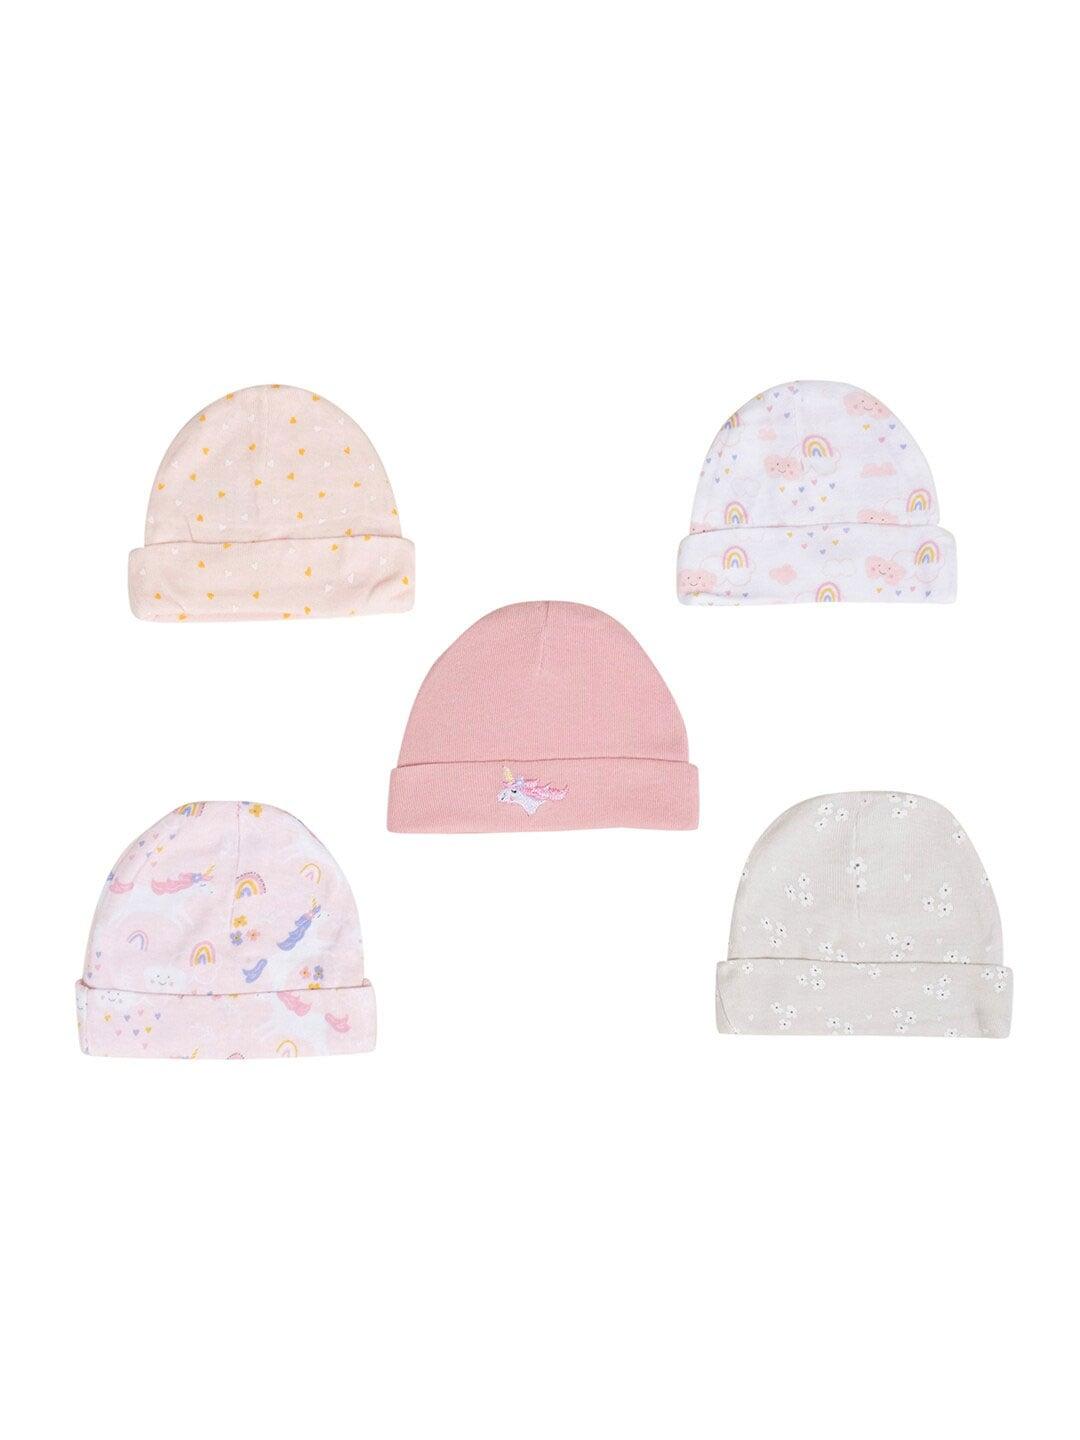 Baby Moo Girls Pack of 5 Printed Cotton Beanie